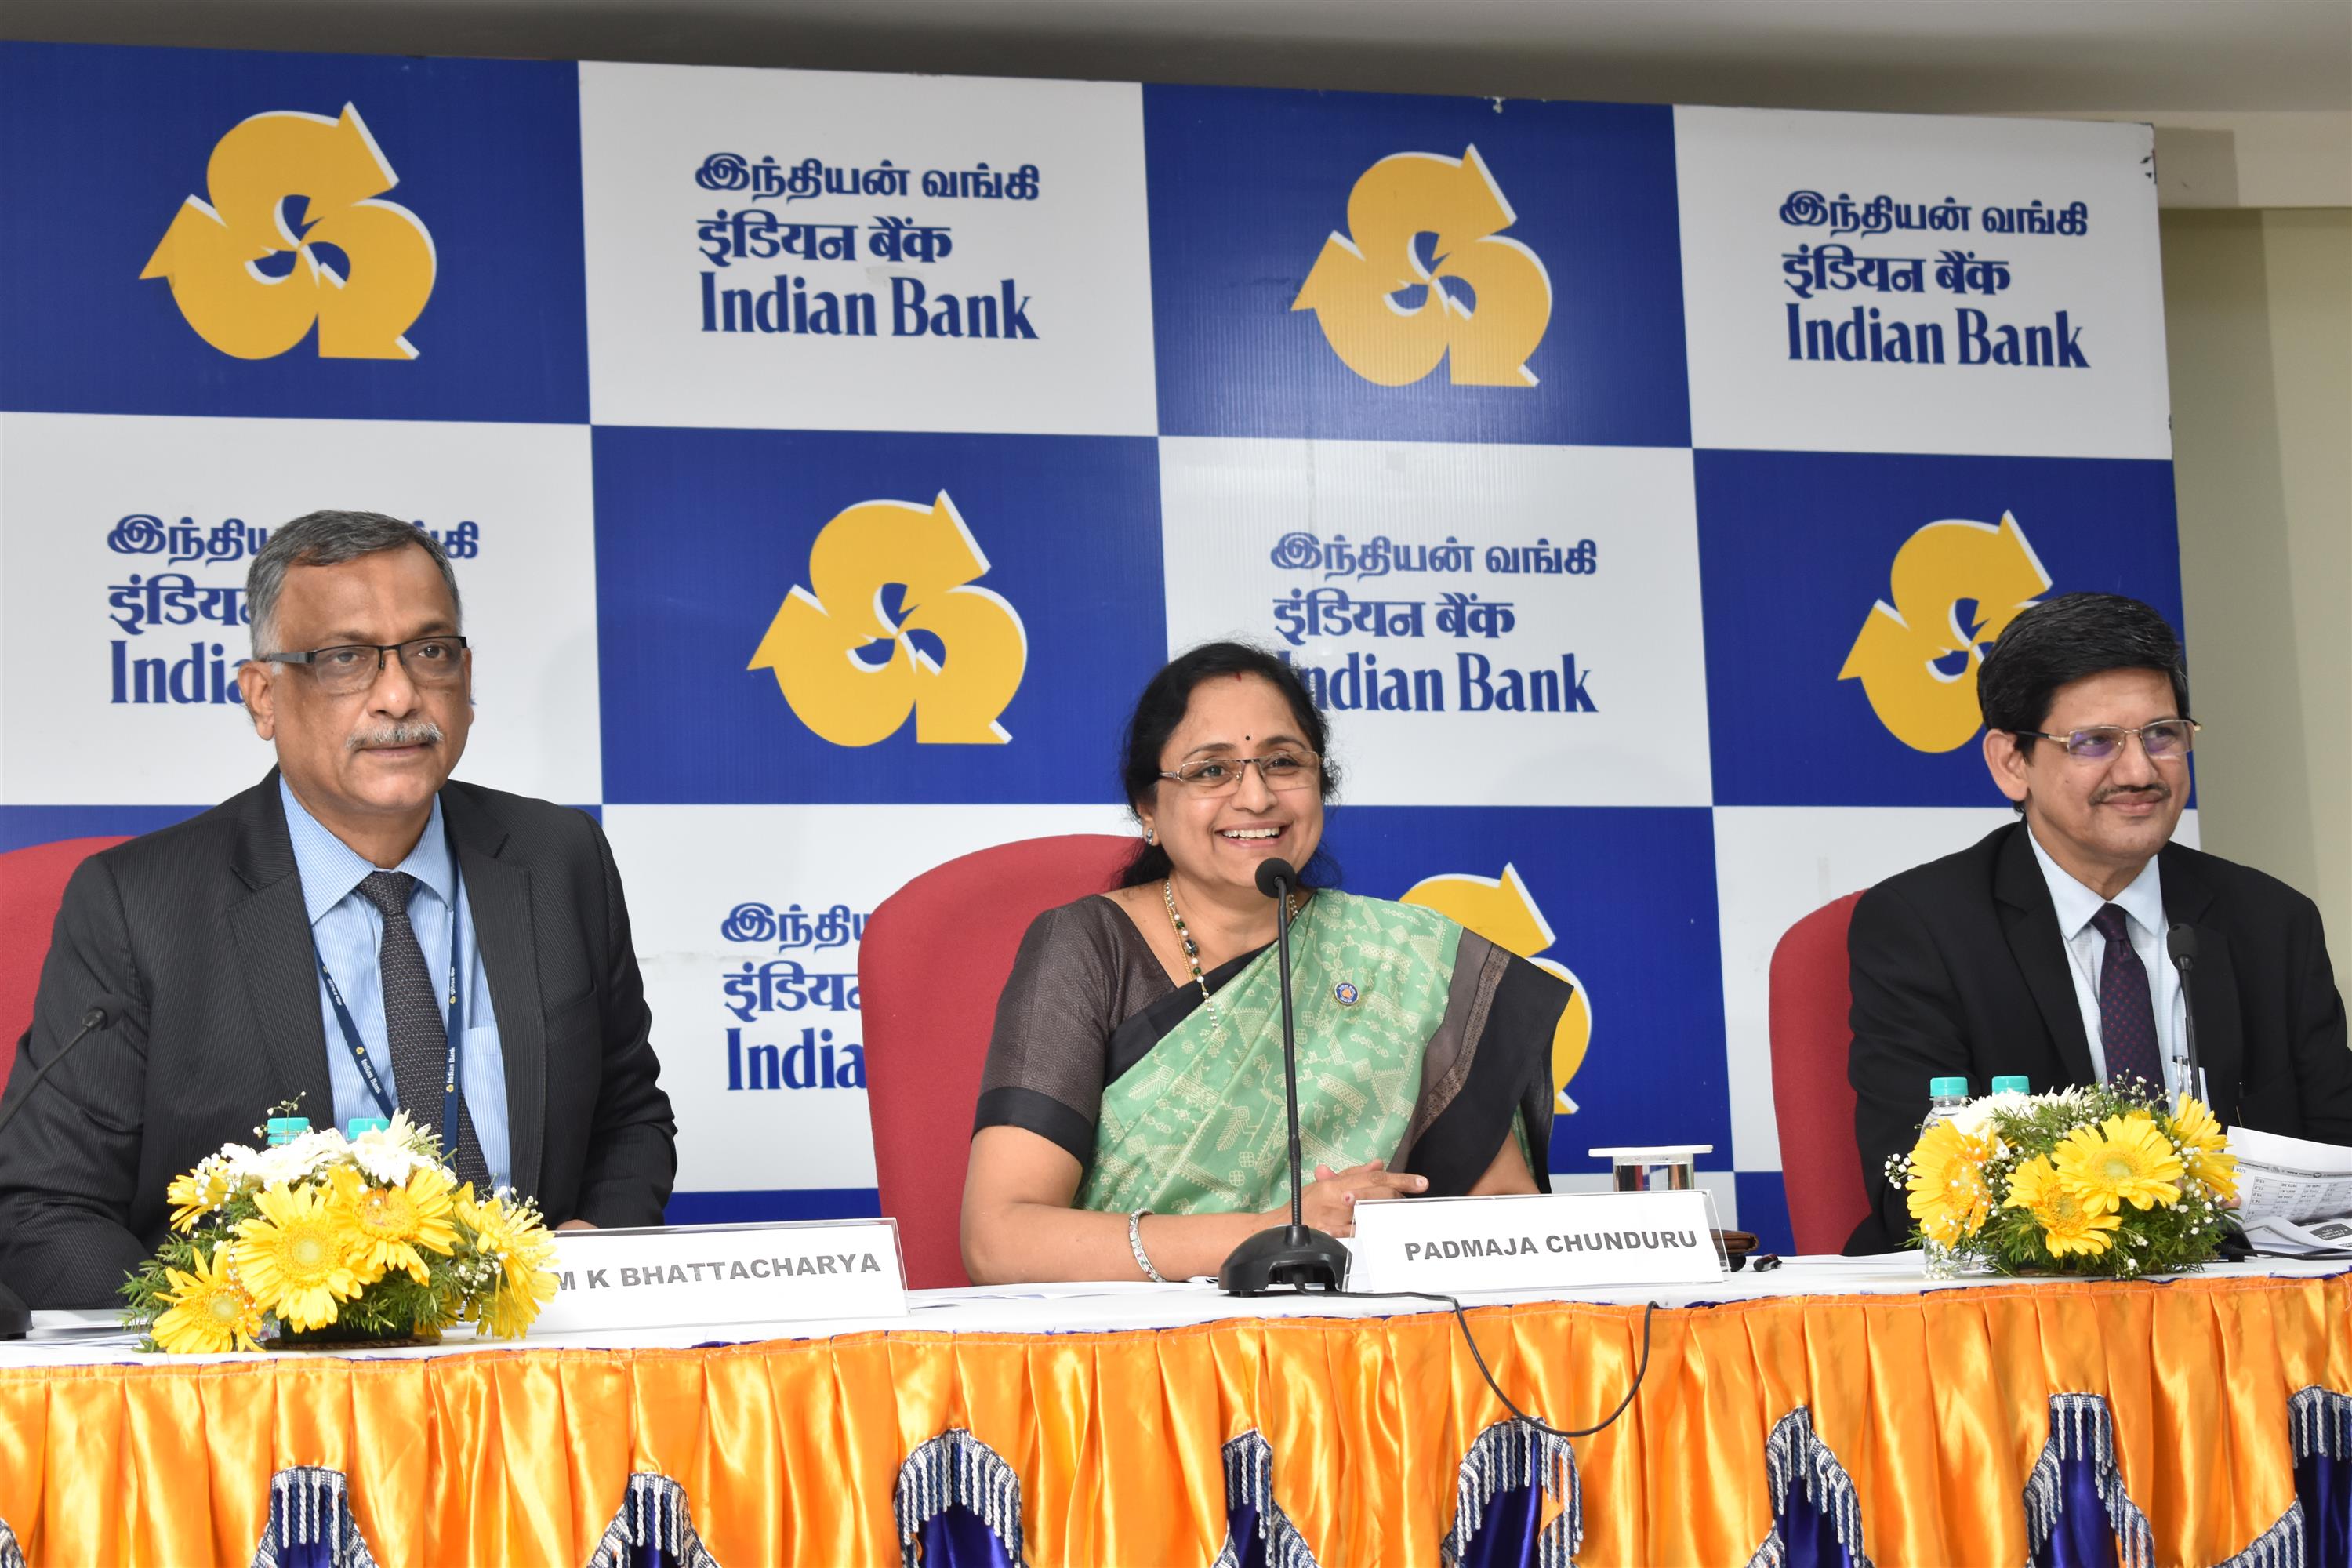 Ms. Padmaja Chunduru, Managing Director and CEO, Indian Bank, Chennai addressing the Media on the Bank’s Reviewed Financial Results for the quarter ended September 30, 2019 at Chennai today (October 23, 2019)